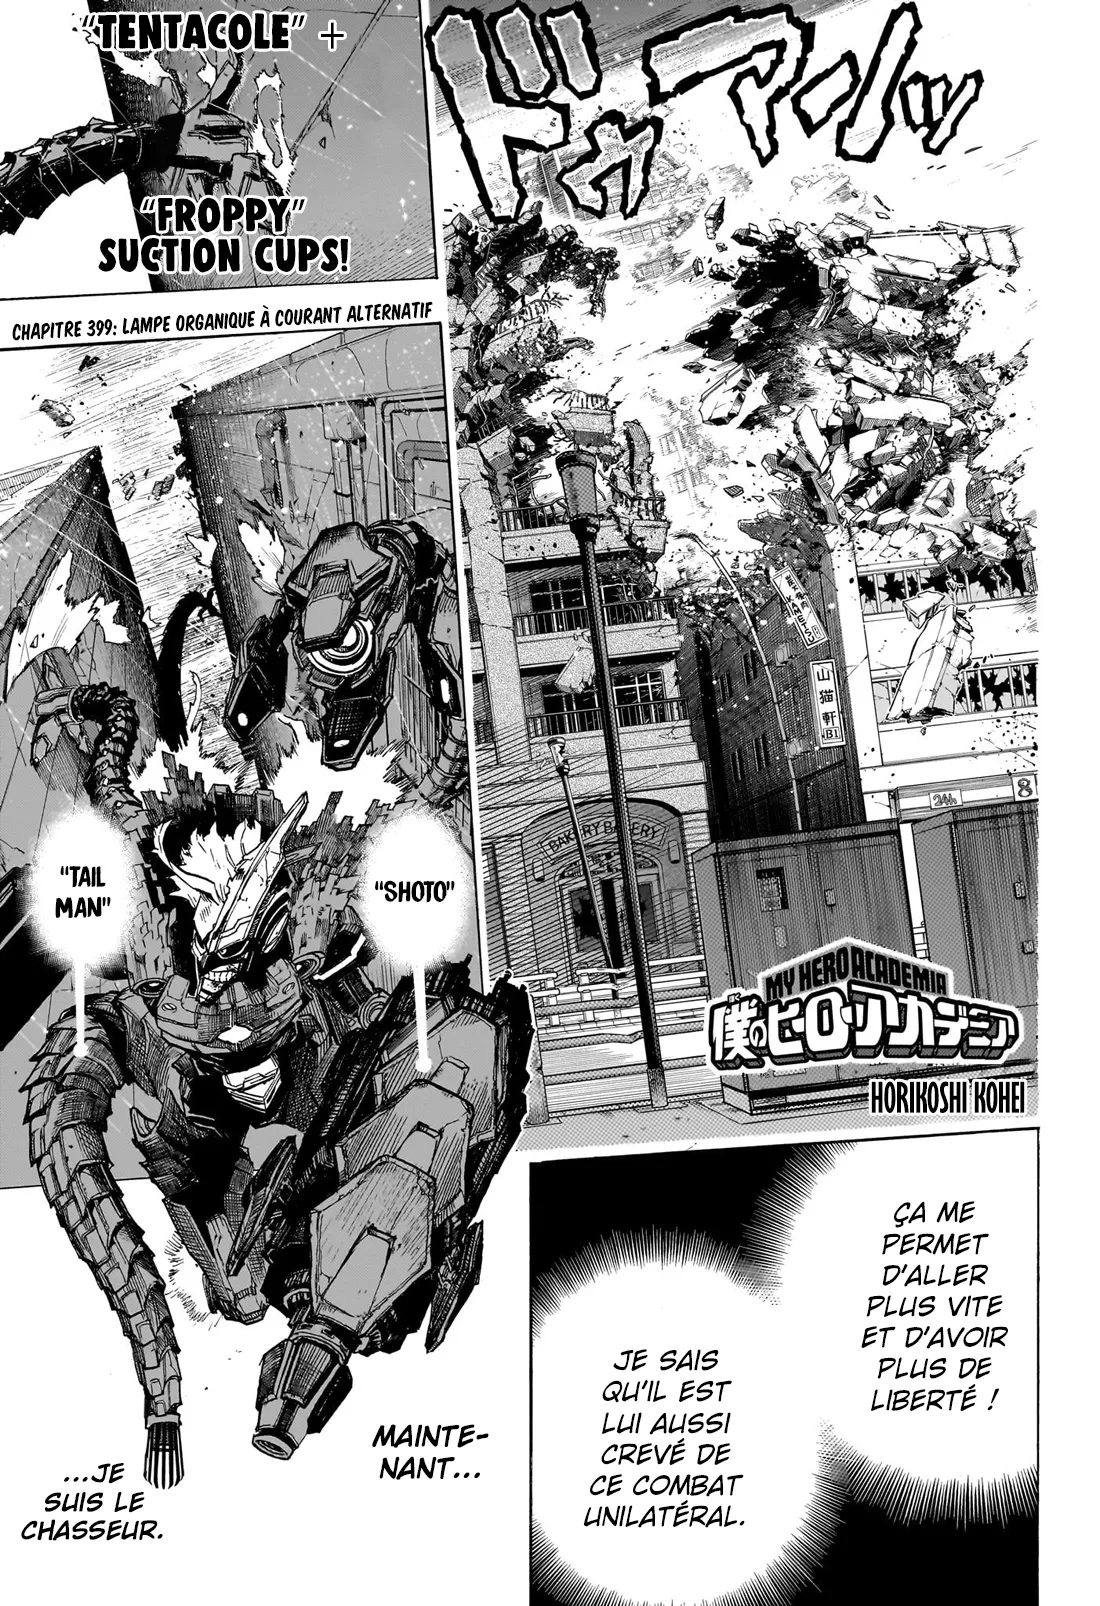 My Hero Academia: Chapter chapitre-399 - Page 1